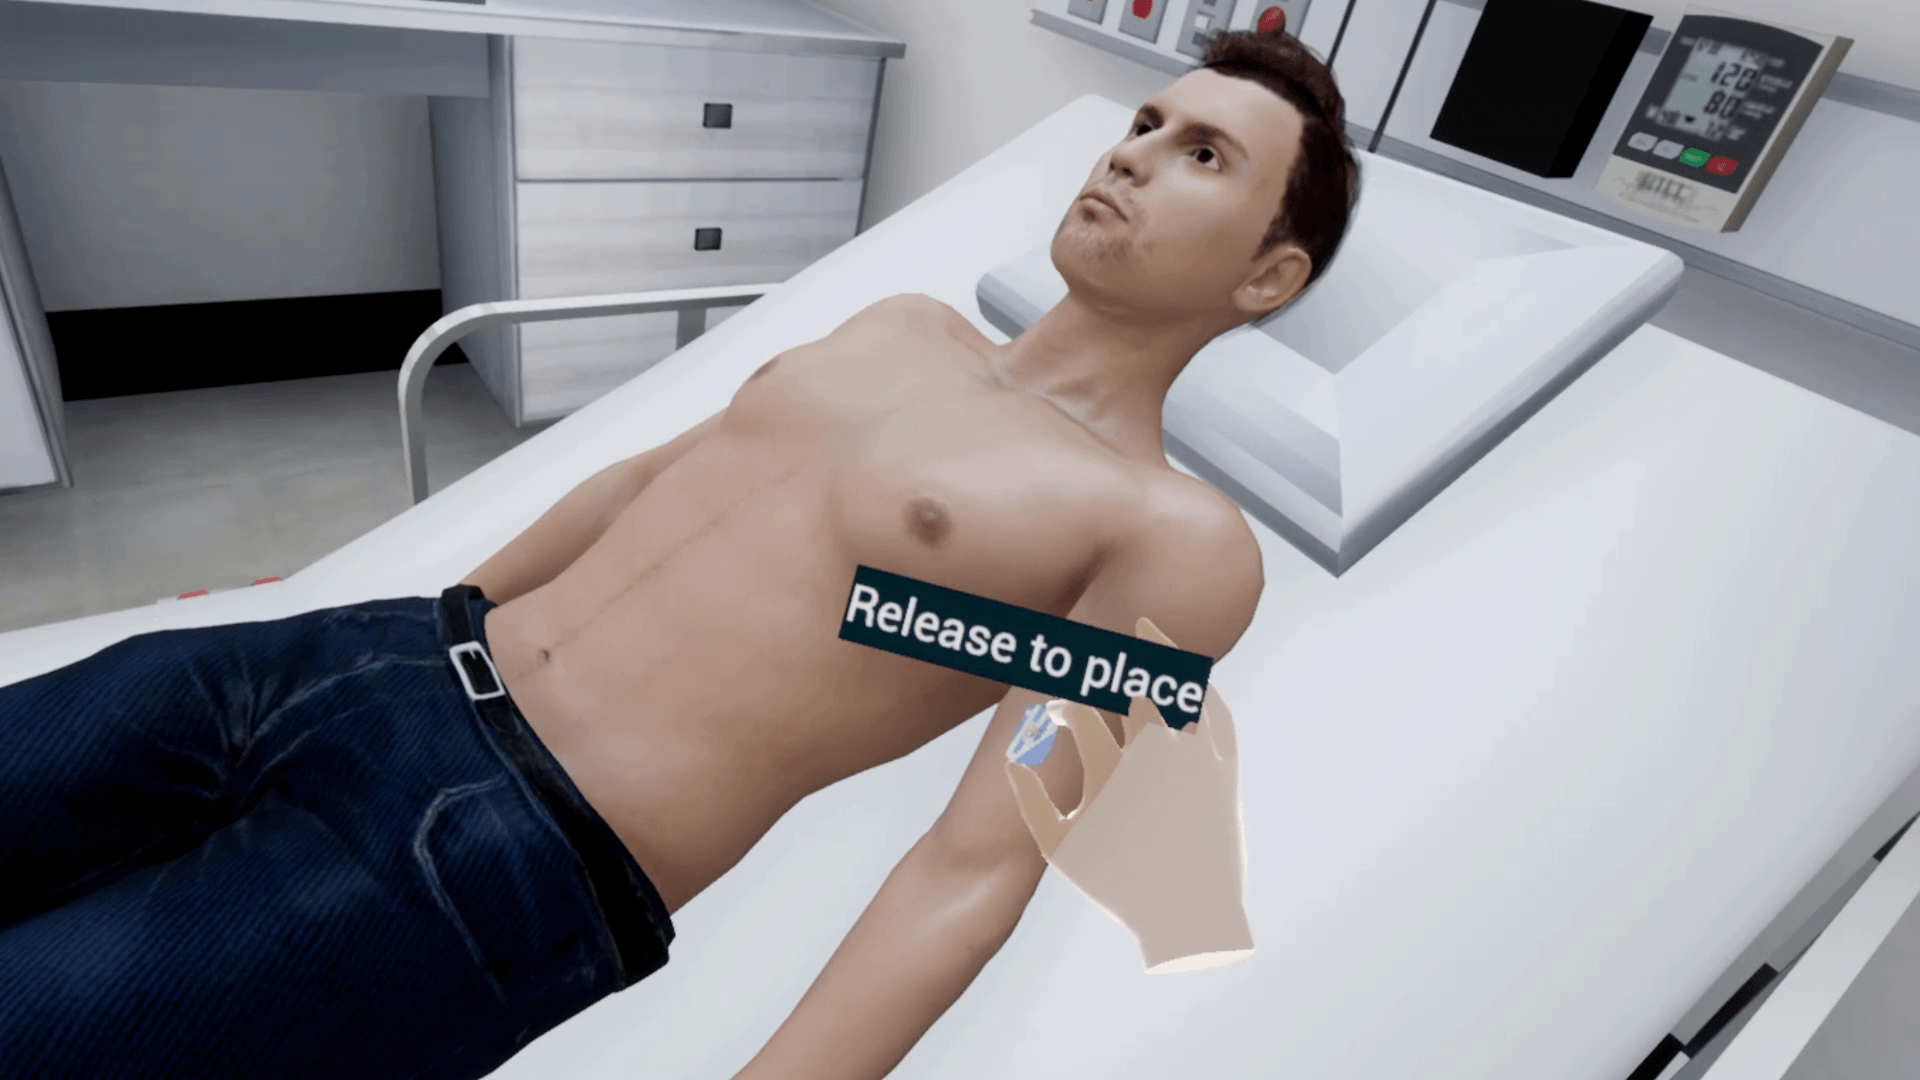 A VR training designed for students to practice the EKG procedure.